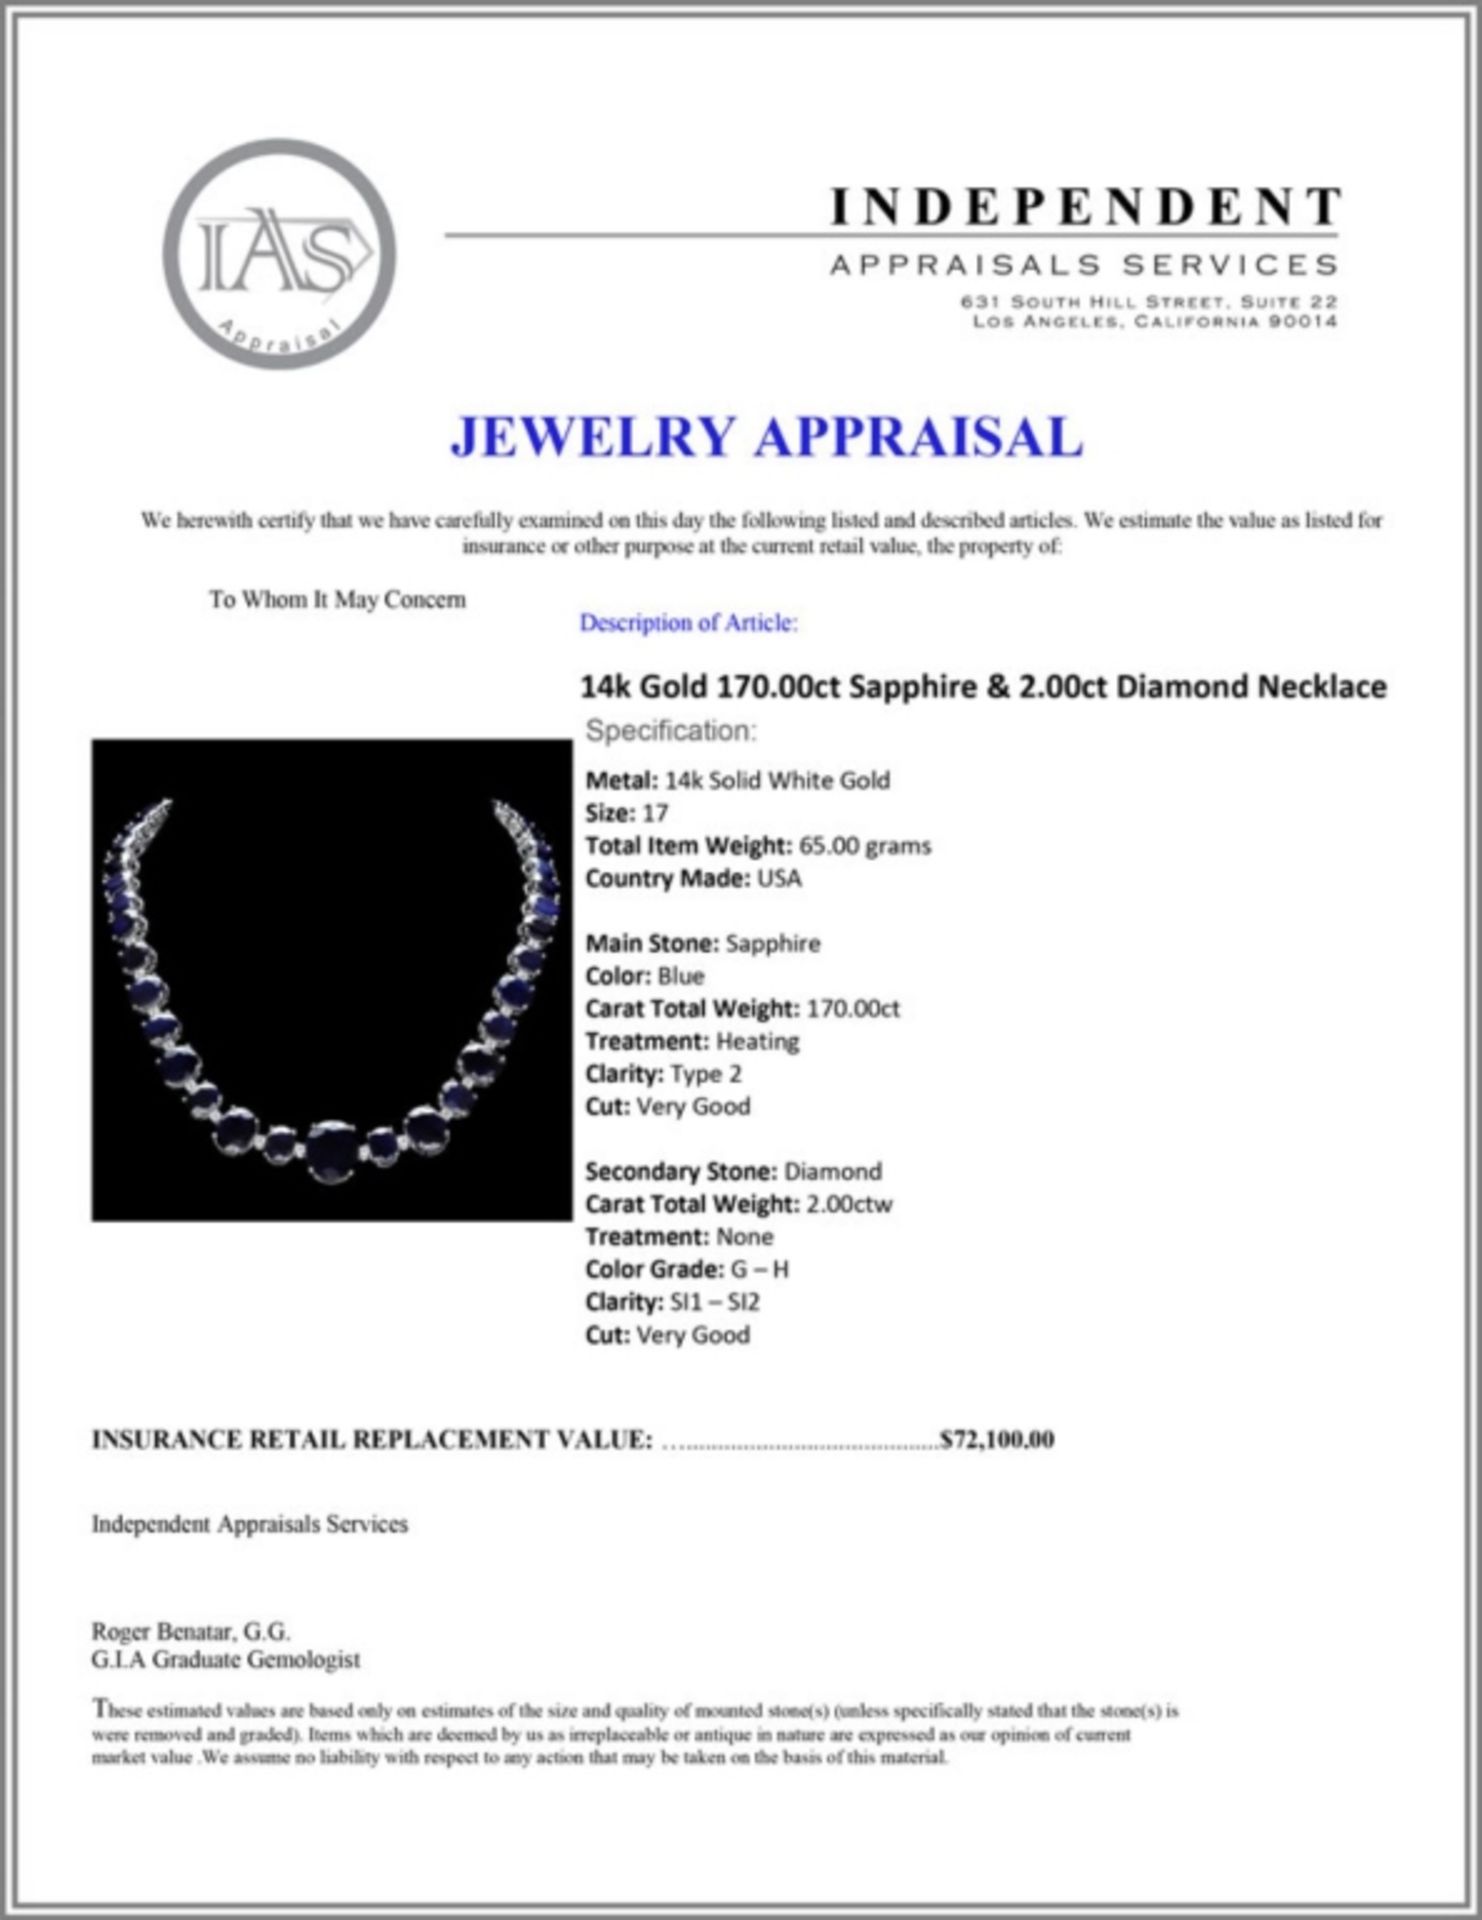 14k Gold 170.00ct Sapphire & 2.00ct Diam Necklace - Image 5 of 5